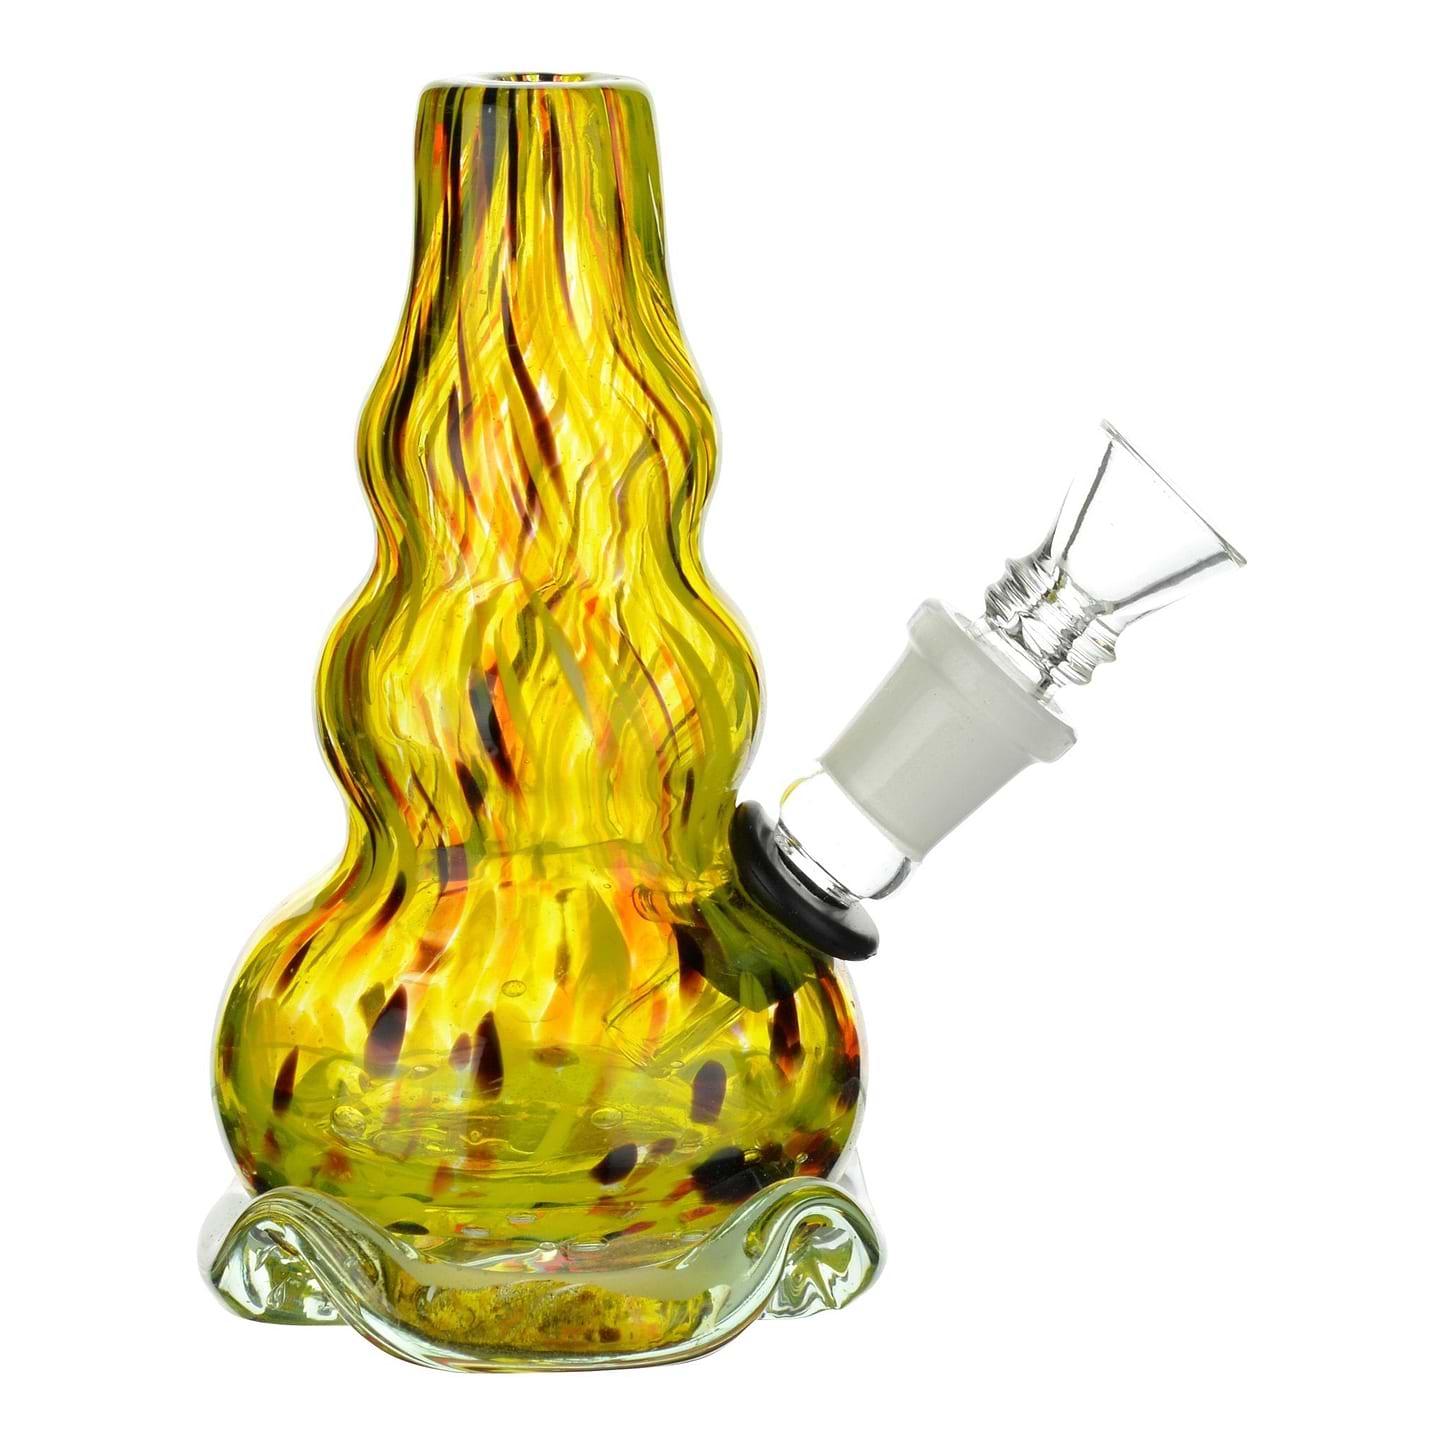 Full shot of yellow 5 inch mini glass bong with lightbulb shape and flower shaped base bowl on right